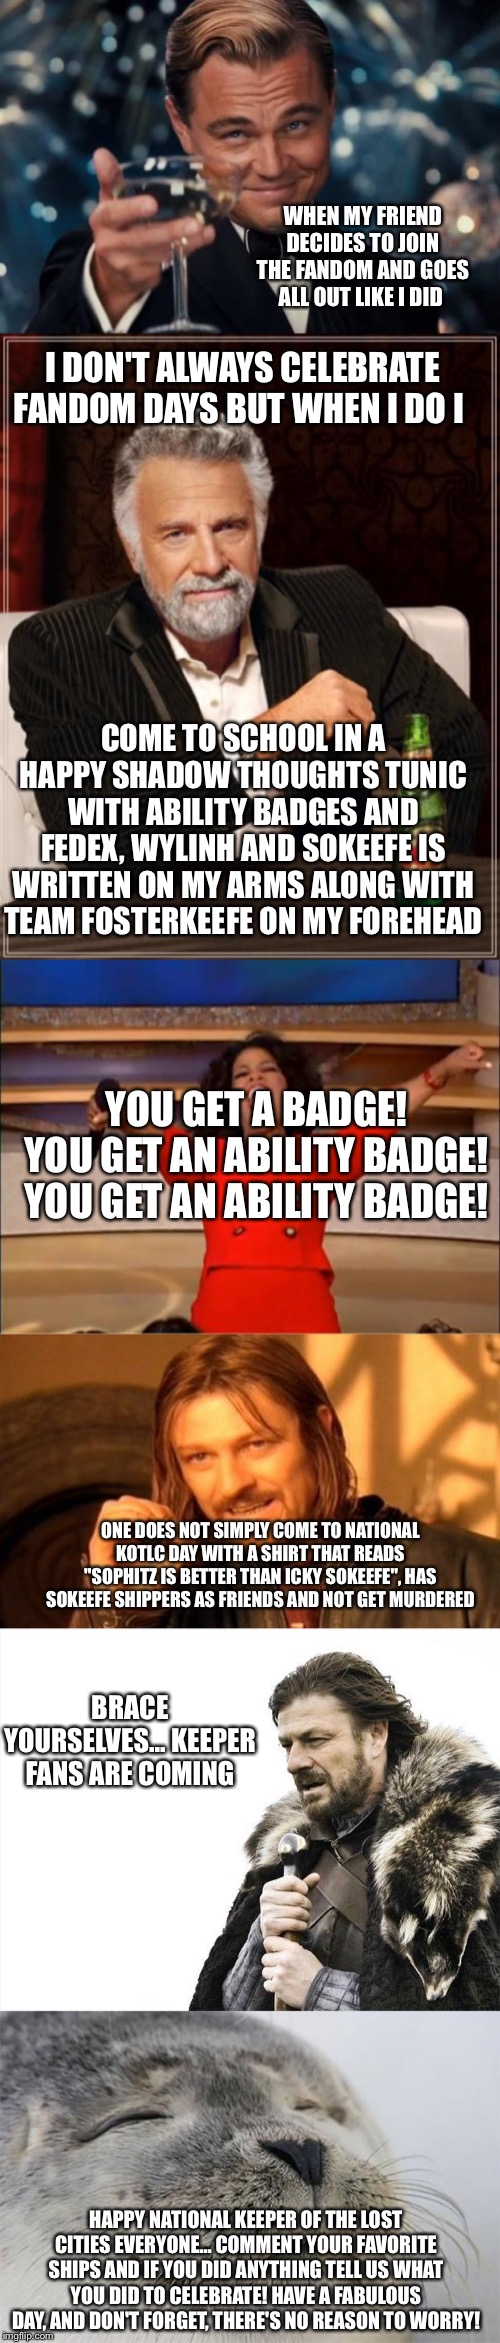 WHEN MY FRIEND DECIDES TO JOIN THE FANDOM AND GOES ALL OUT LIKE I DID; I DON'T ALWAYS CELEBRATE FANDOM DAYS BUT WHEN I DO I; COME TO SCHOOL IN A HAPPY SHADOW THOUGHTS TUNIC WITH ABILITY BADGES AND FEDEX, WYLINH AND SOKEEFE IS WRITTEN ON MY ARMS ALONG WITH TEAM FOSTERKEEFE ON MY FOREHEAD; YOU GET A BADGE! YOU GET AN ABILITY BADGE! YOU GET AN ABILITY BADGE! ONE DOES NOT SIMPLY COME TO NATIONAL KOTLC DAY WITH A SHIRT THAT READS "SOPHITZ IS BETTER THAN ICKY SOKEEFE", HAS SOKEEFE SHIPPERS AS FRIENDS AND NOT GET MURDERED; BRACE YOURSELVES... KEEPER FANS ARE COMING; HAPPY NATIONAL KEEPER OF THE LOST CITIES EVERYONE... COMMENT YOUR FAVORITE SHIPS AND IF YOU DID ANYTHING TELL US WHAT YOU DID TO CELEBRATE! HAVE A FABULOUS DAY, AND DON'T FORGET, THERE'S NO REASON TO WORRY! | image tagged in memes,the most interesting man in the world,brace yourselves x is coming,one does not simply,leonardo dicaprio cheers,satisfied | made w/ Imgflip meme maker